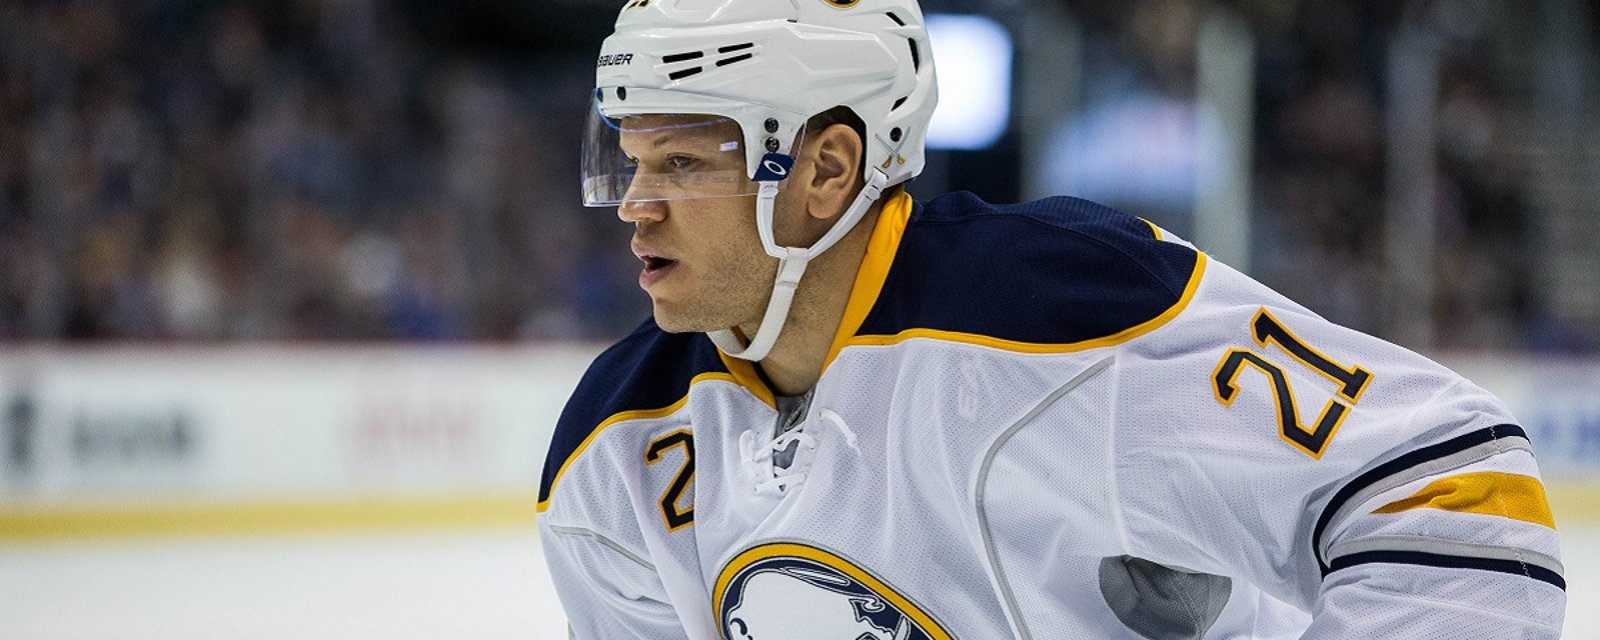 Breaking: Injury that landed Okposo in intensive care finally revealed. 